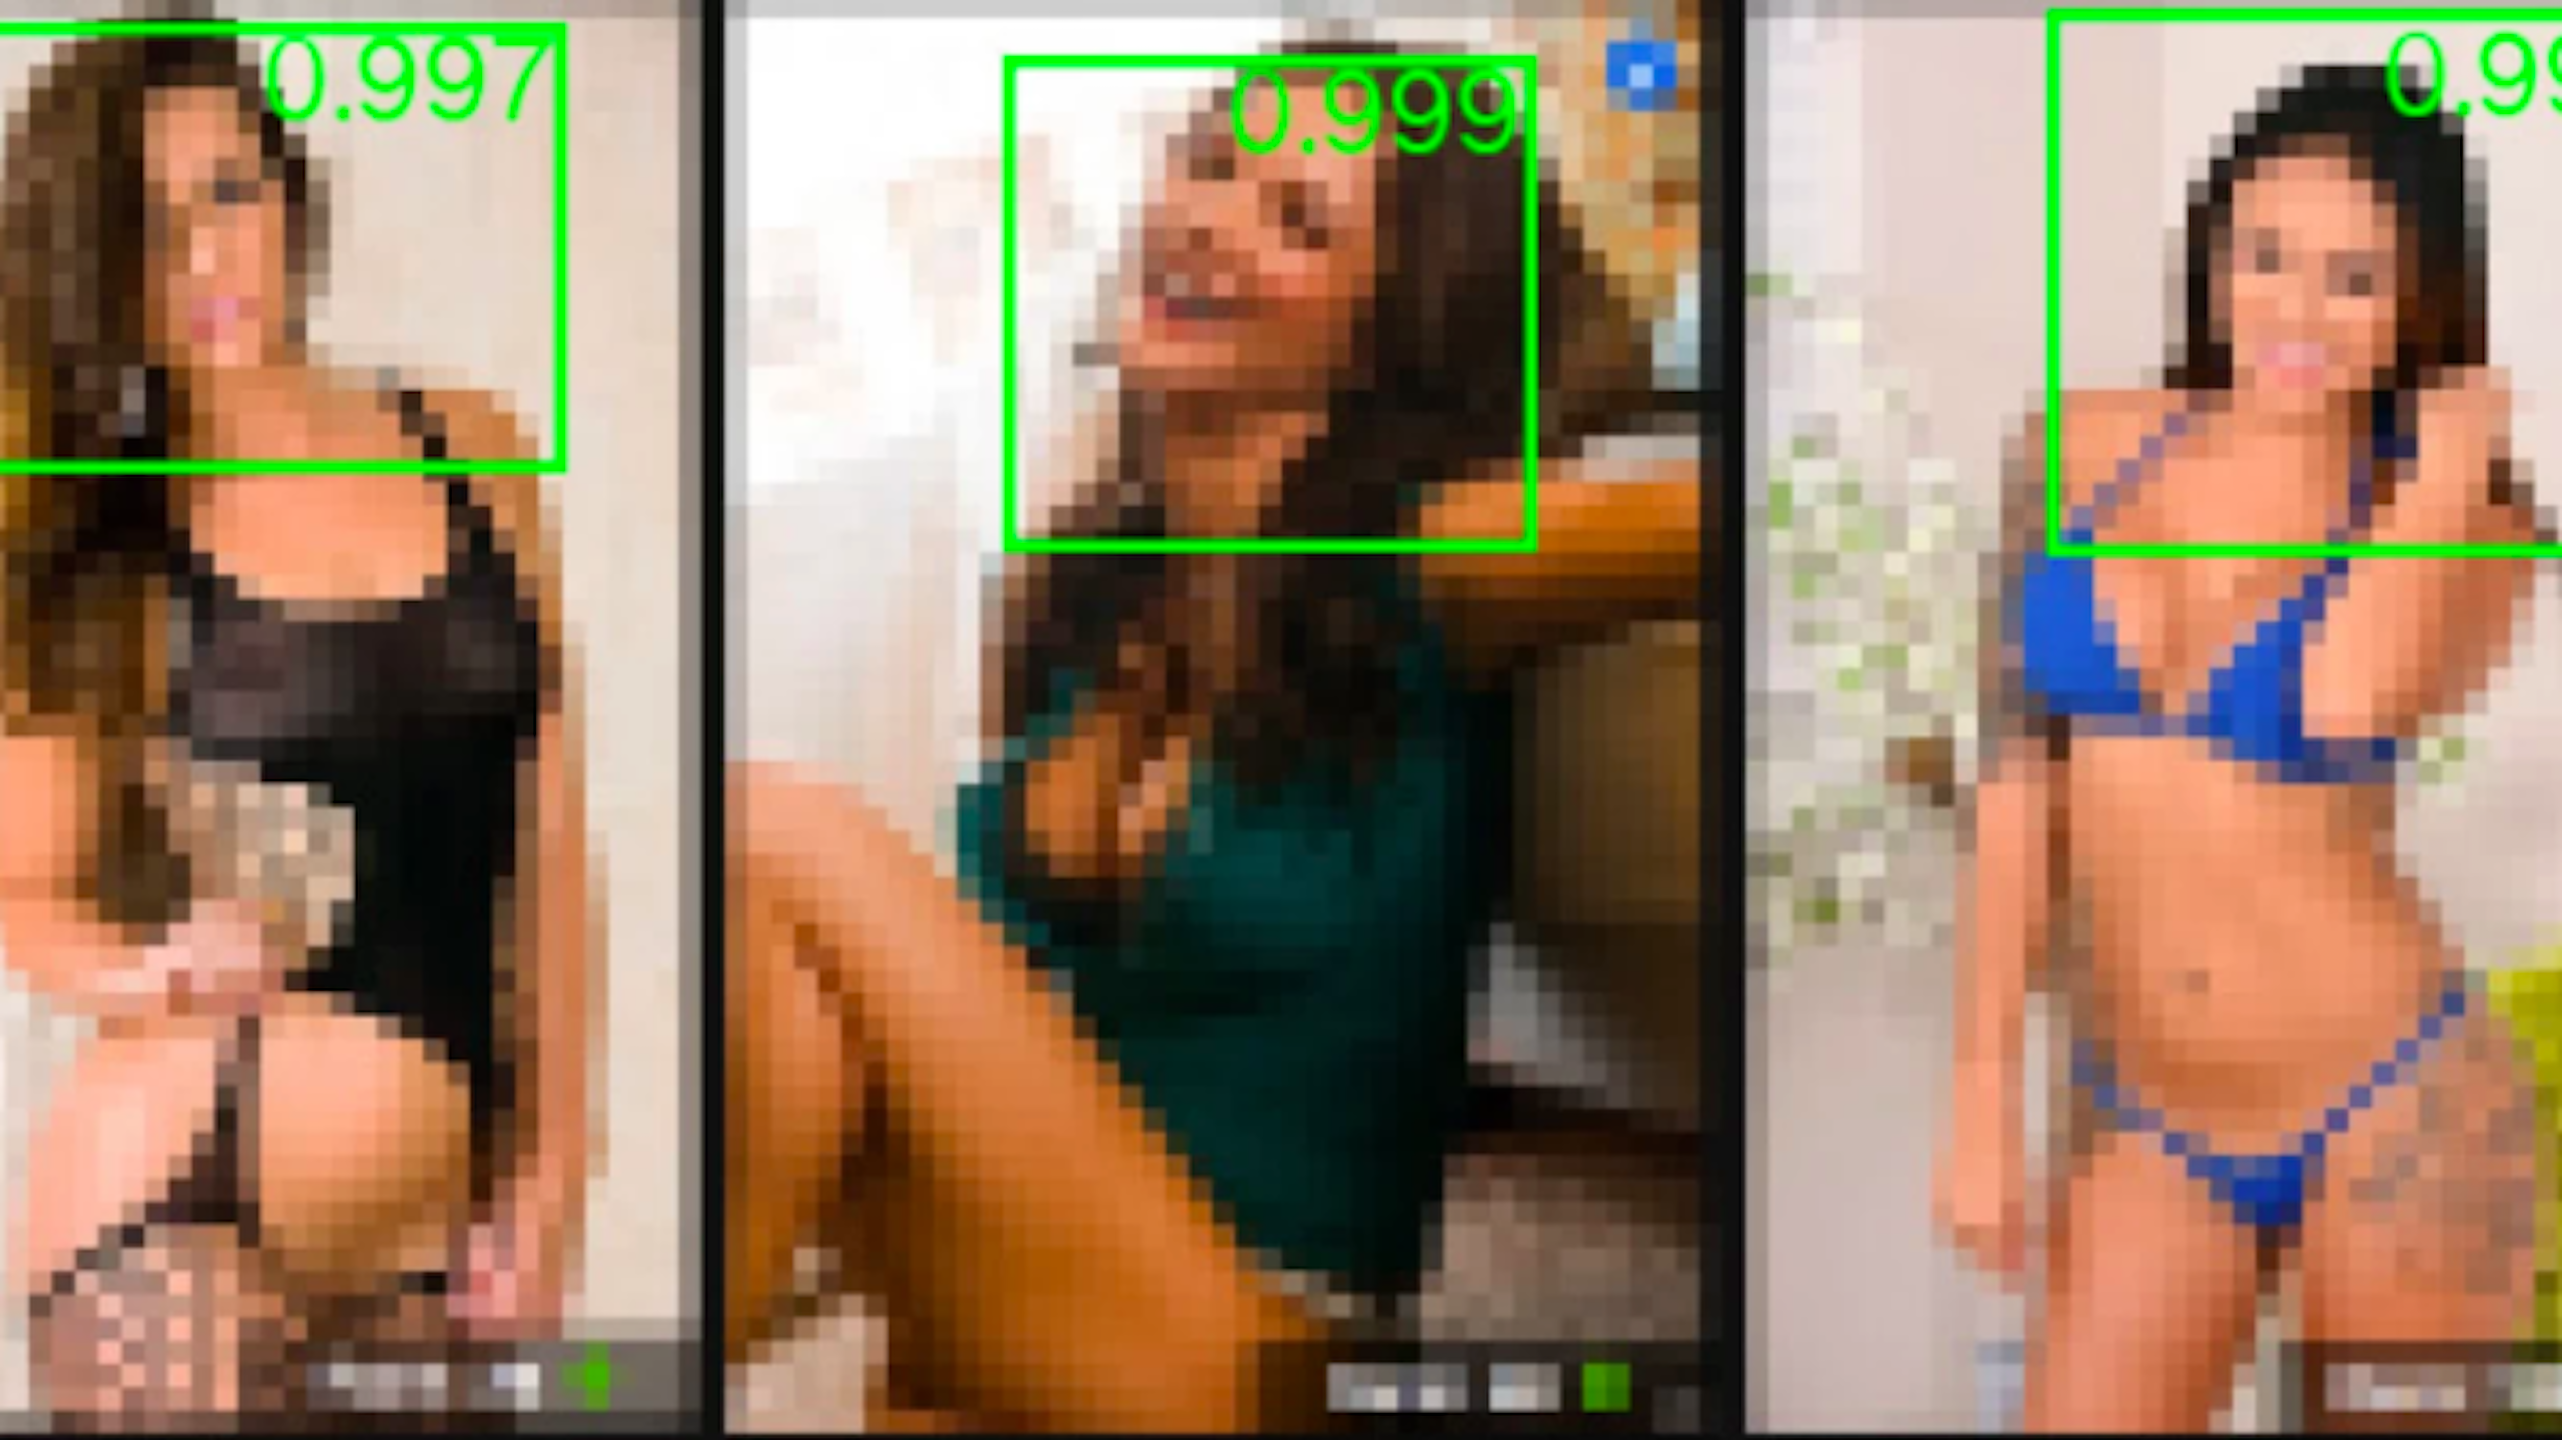 Porn Star Face Recognition